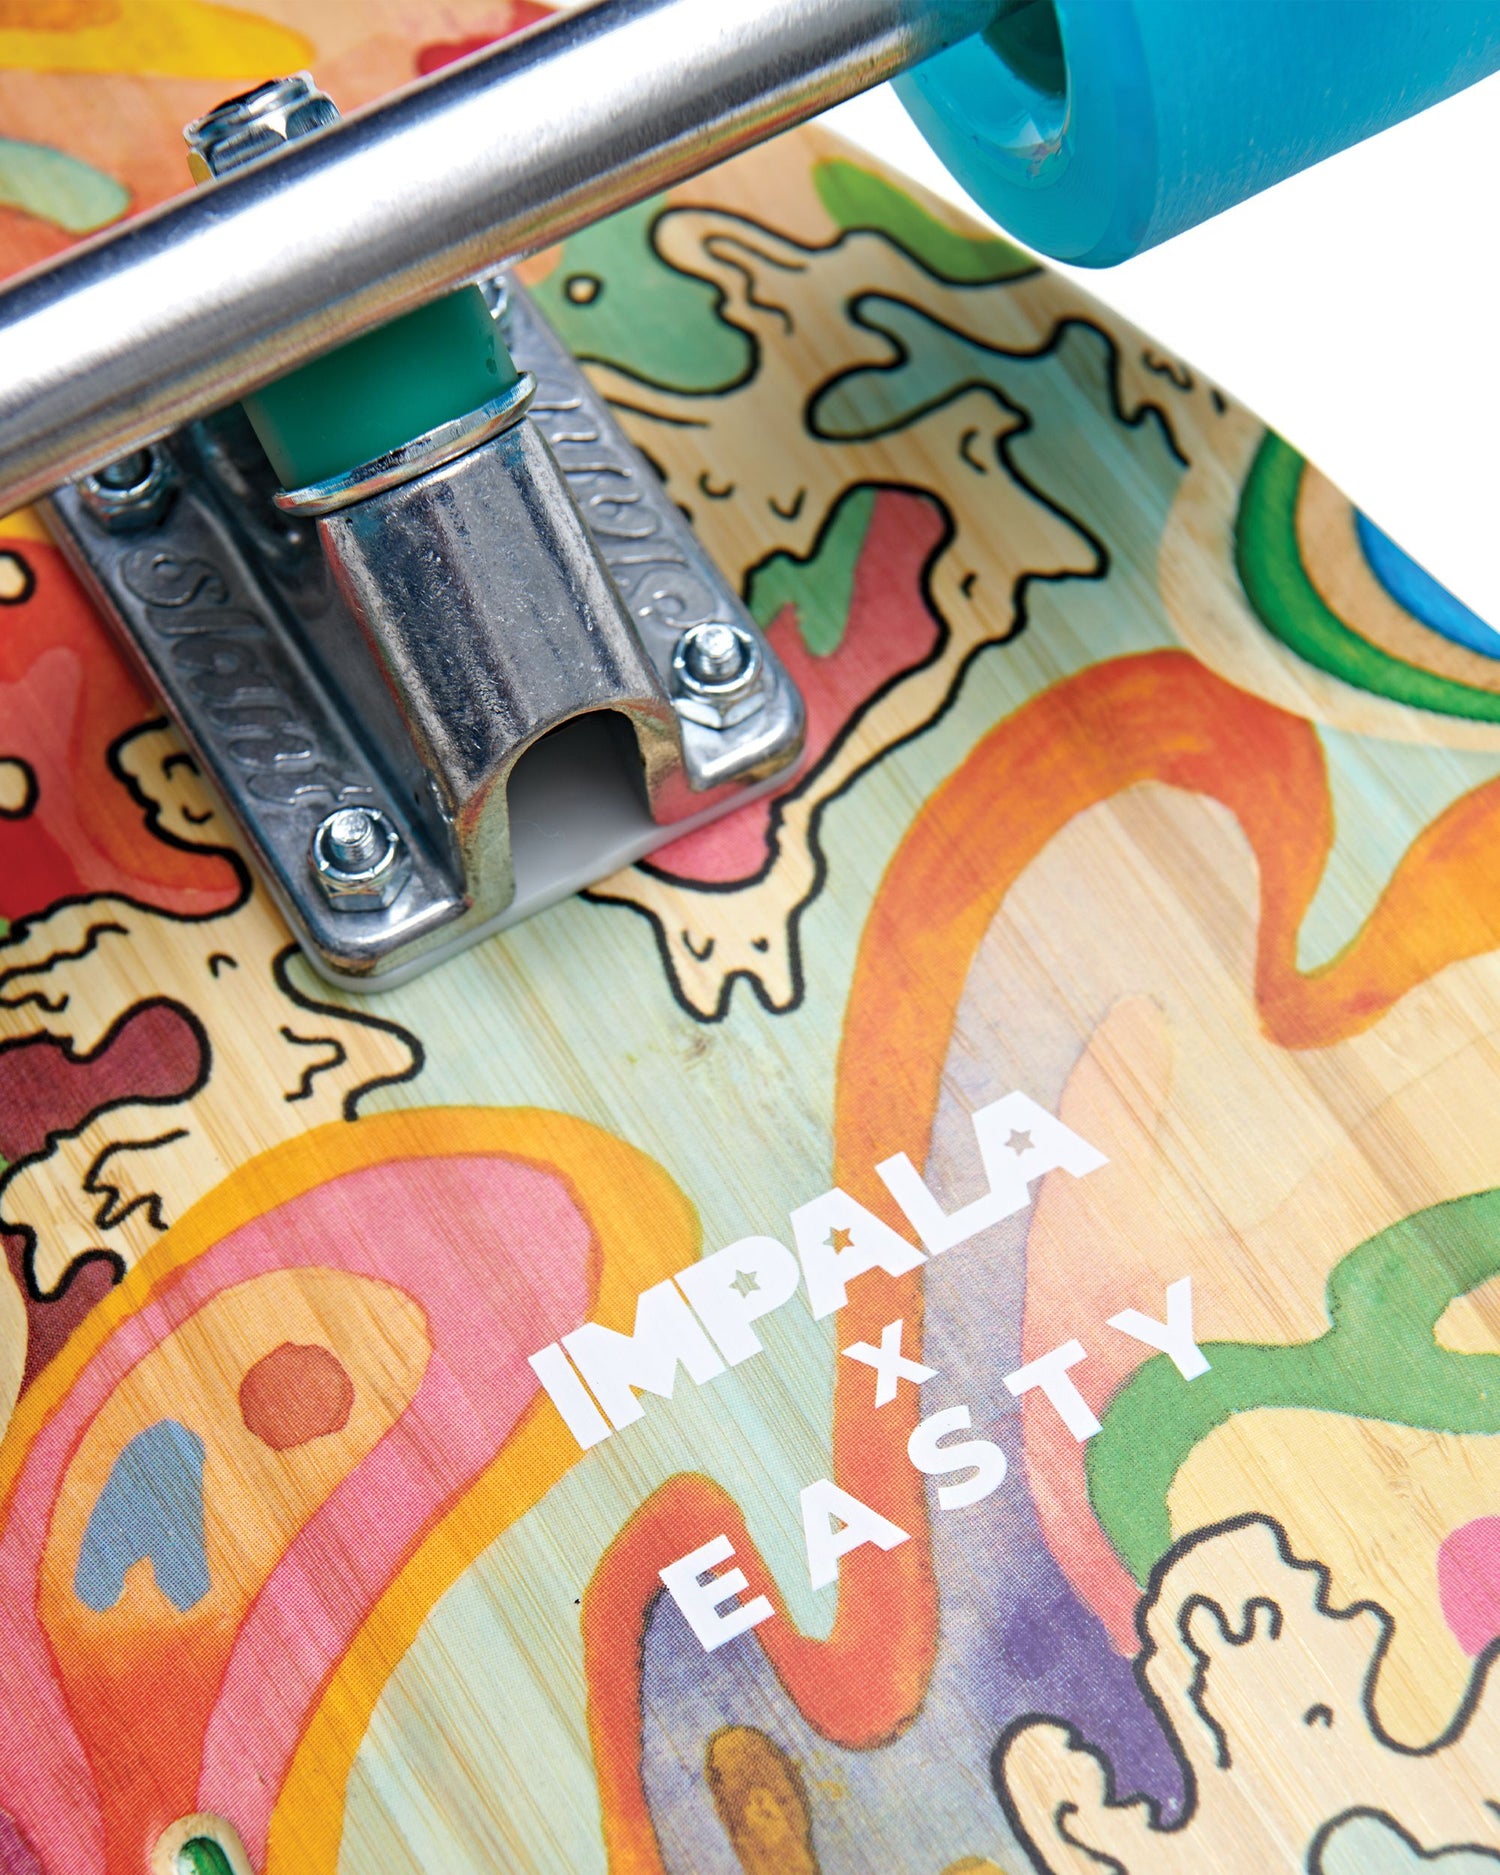 Graphic and truck detailing of Impala Sirena Longboard - Easty Beasty